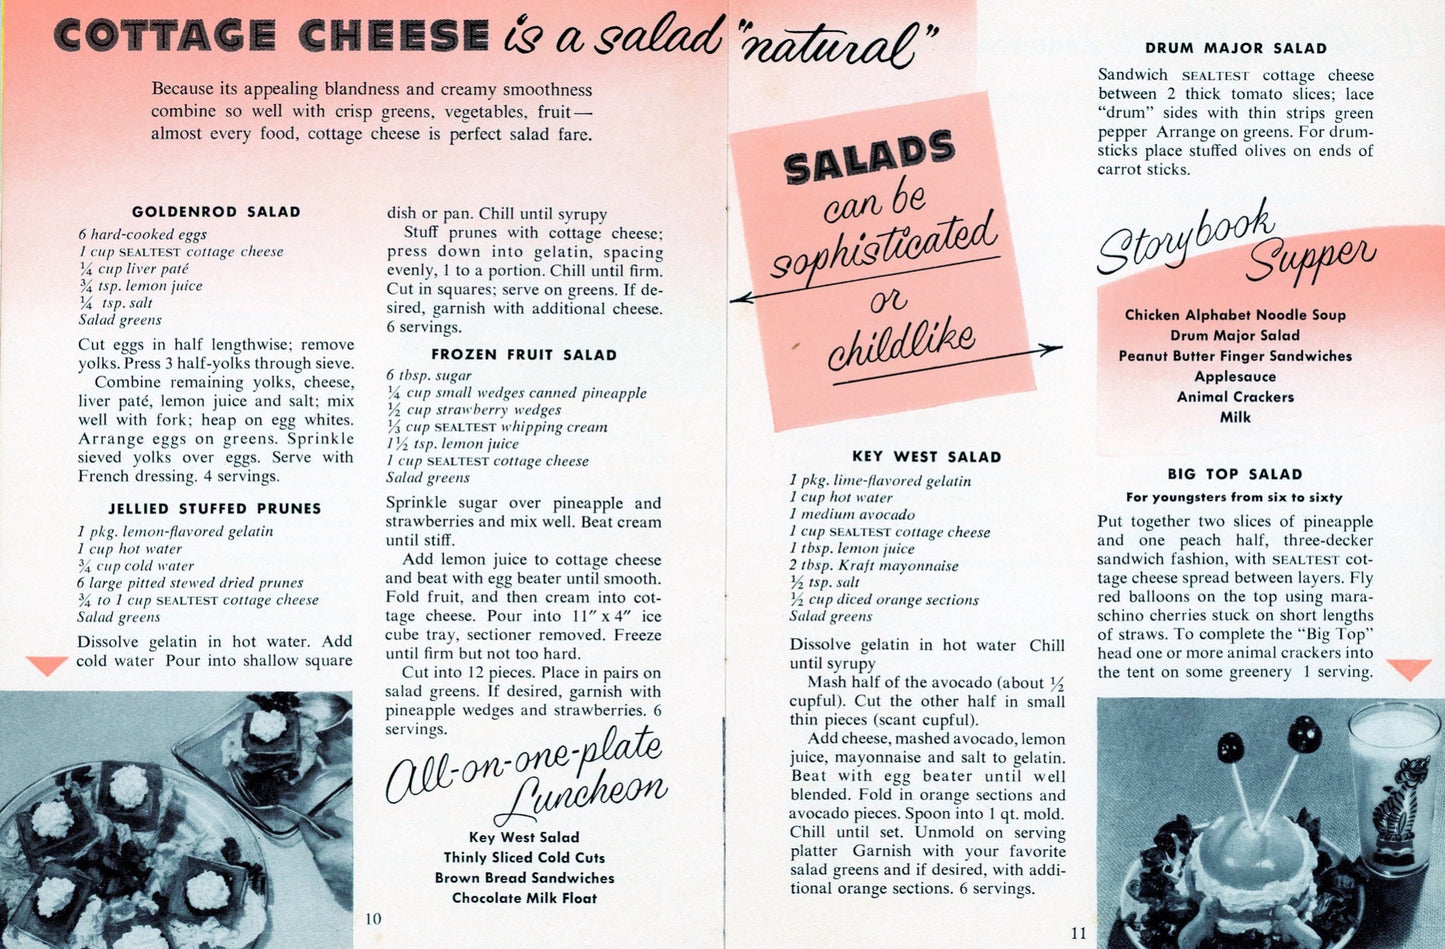 SERVE MORE COTTAGE CHEESE Recipes From Sealtest Kitchens Recipe Booklet Circa 1954